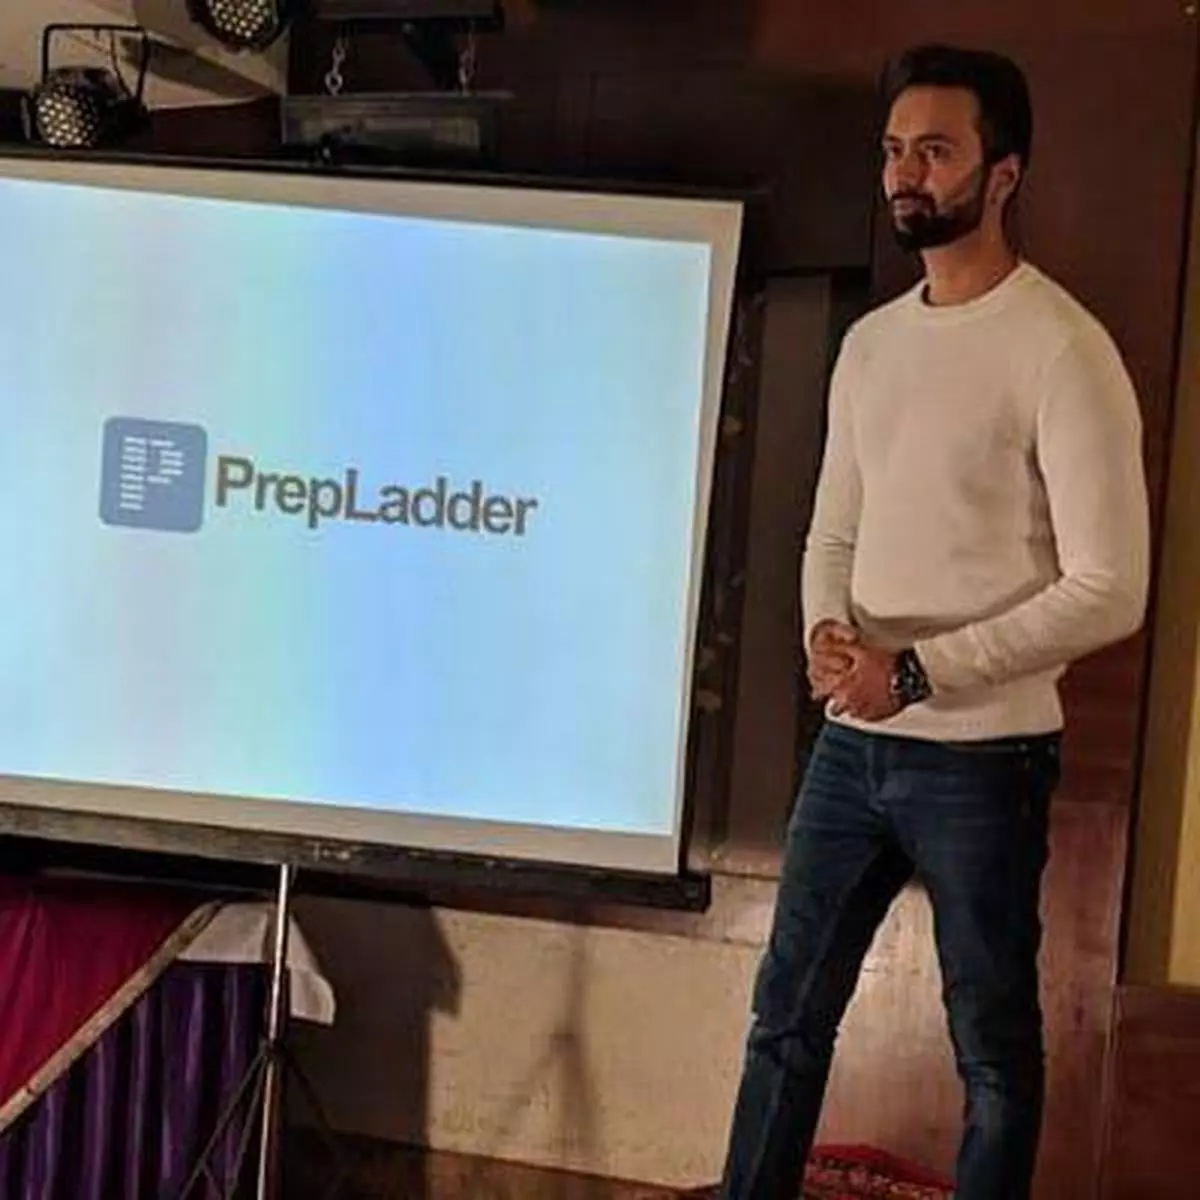 Deepanshu Goyal, CEO and Co-founder of PrepLadder